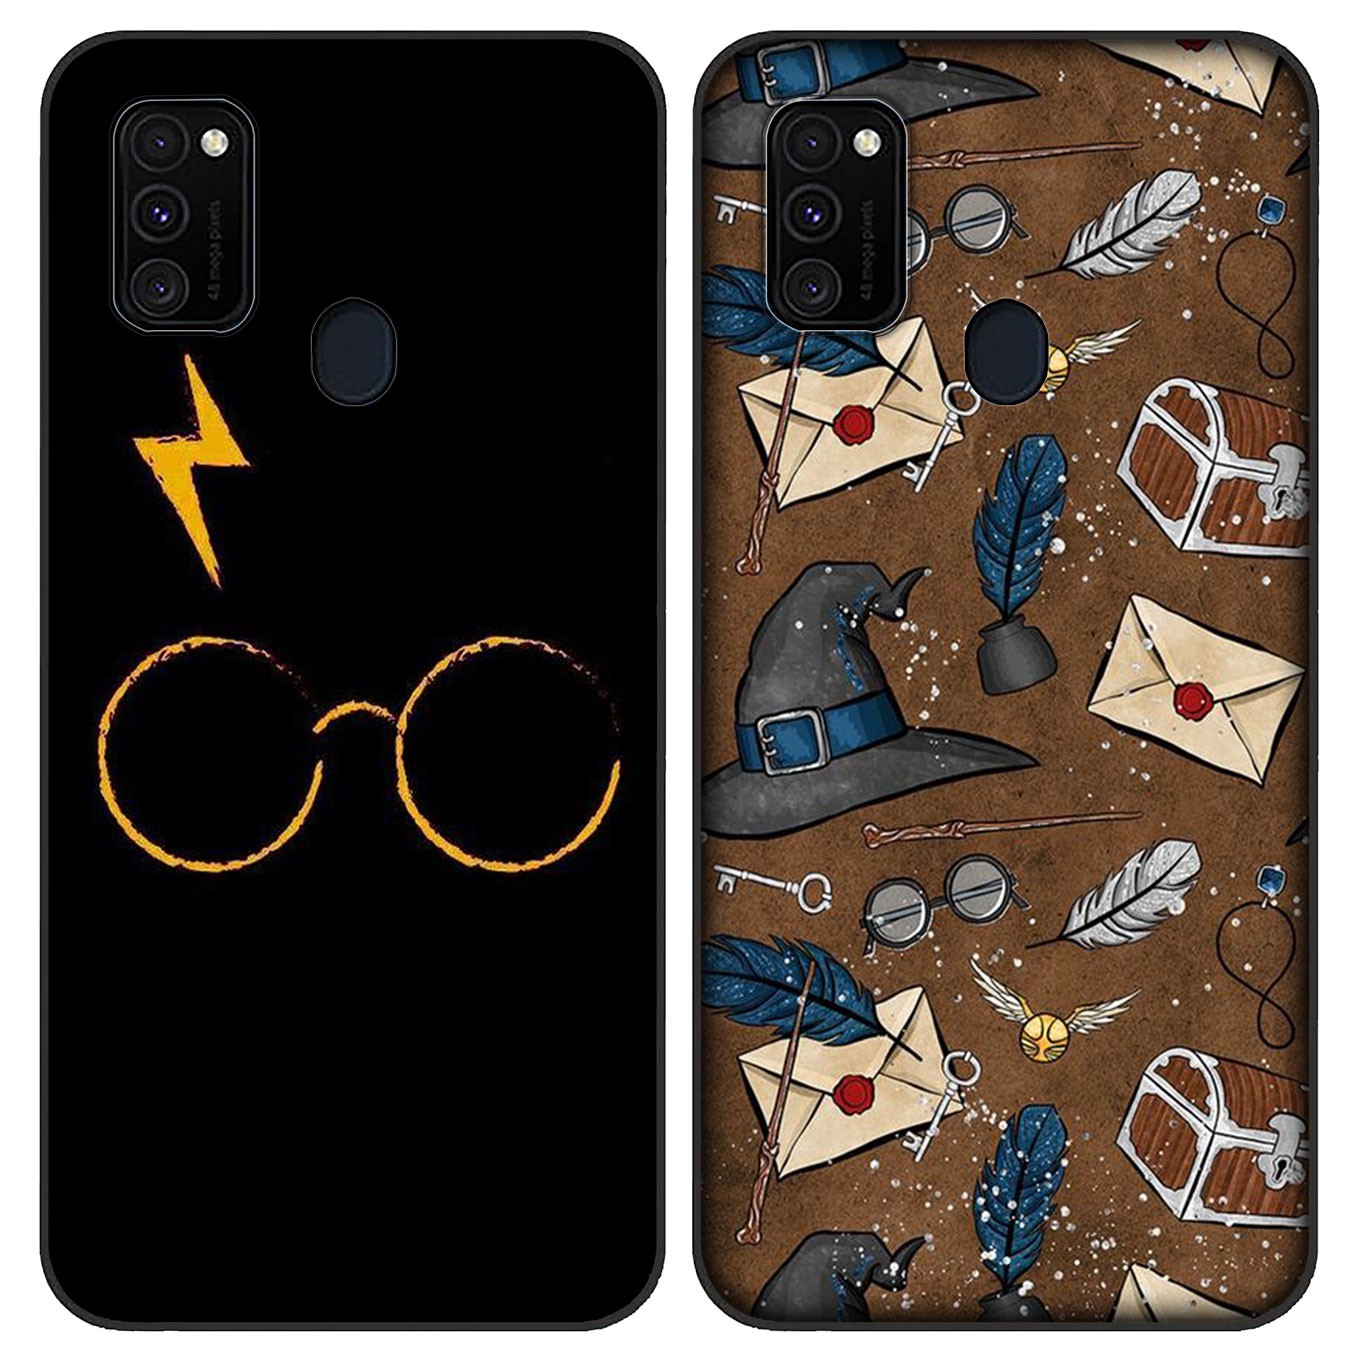 Ốp Lưng Silicone In Hình Harry Potter Cho Xiaomi Redmi Note 9 / 7 Pro / 9a / 7a / 9c / Note7 / Note9 / 9pro / 7pro